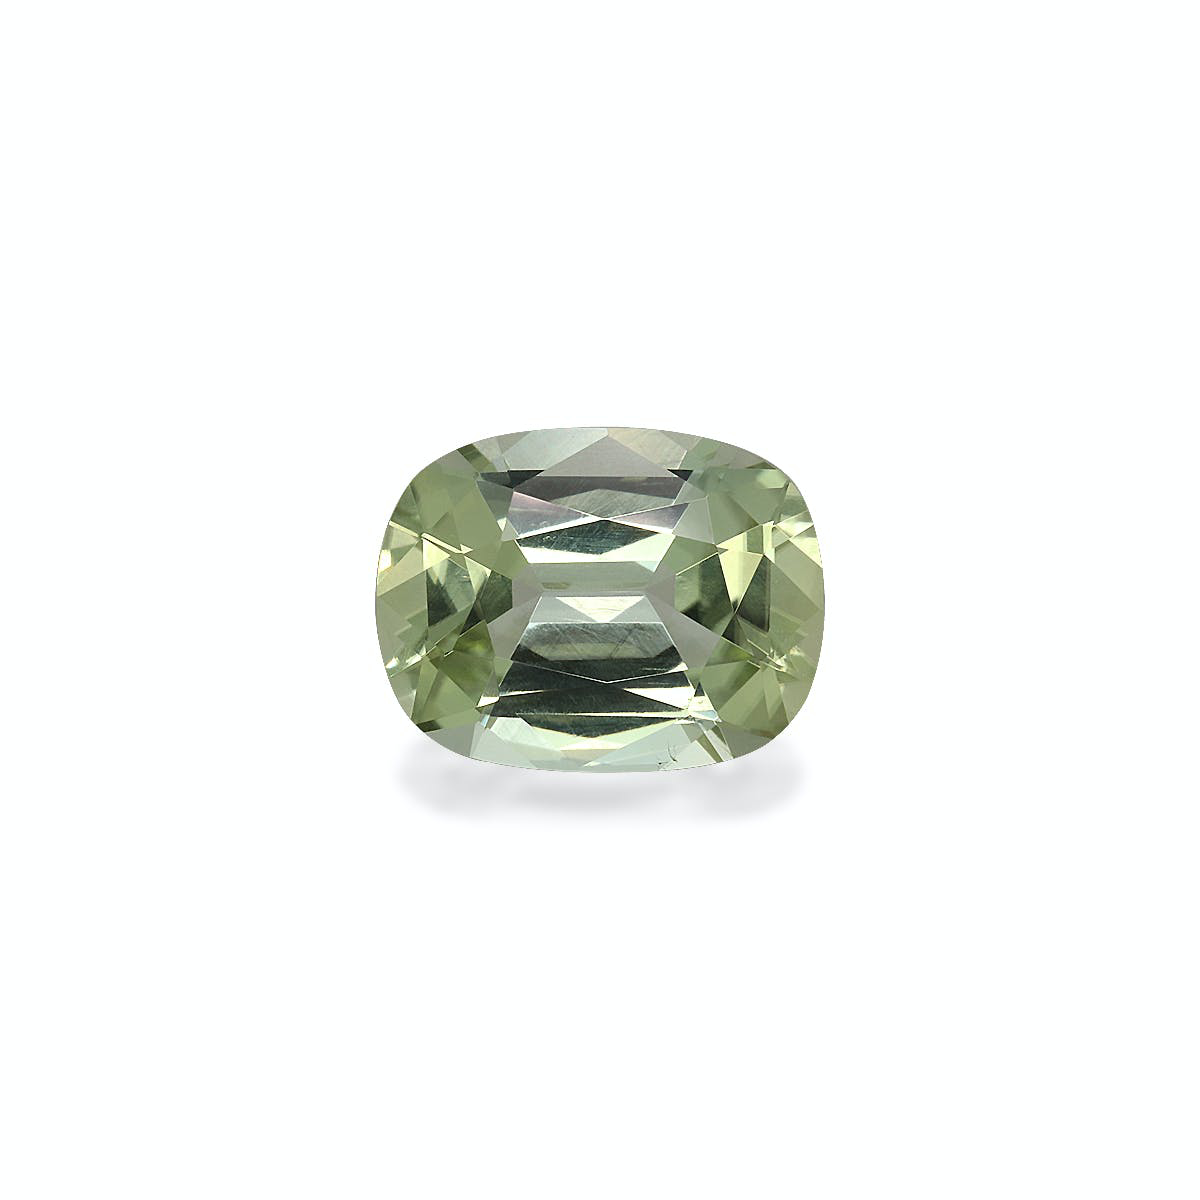 Picture of Pale Green Tourmaline 3.87ct - 11x9mm (TG1397)